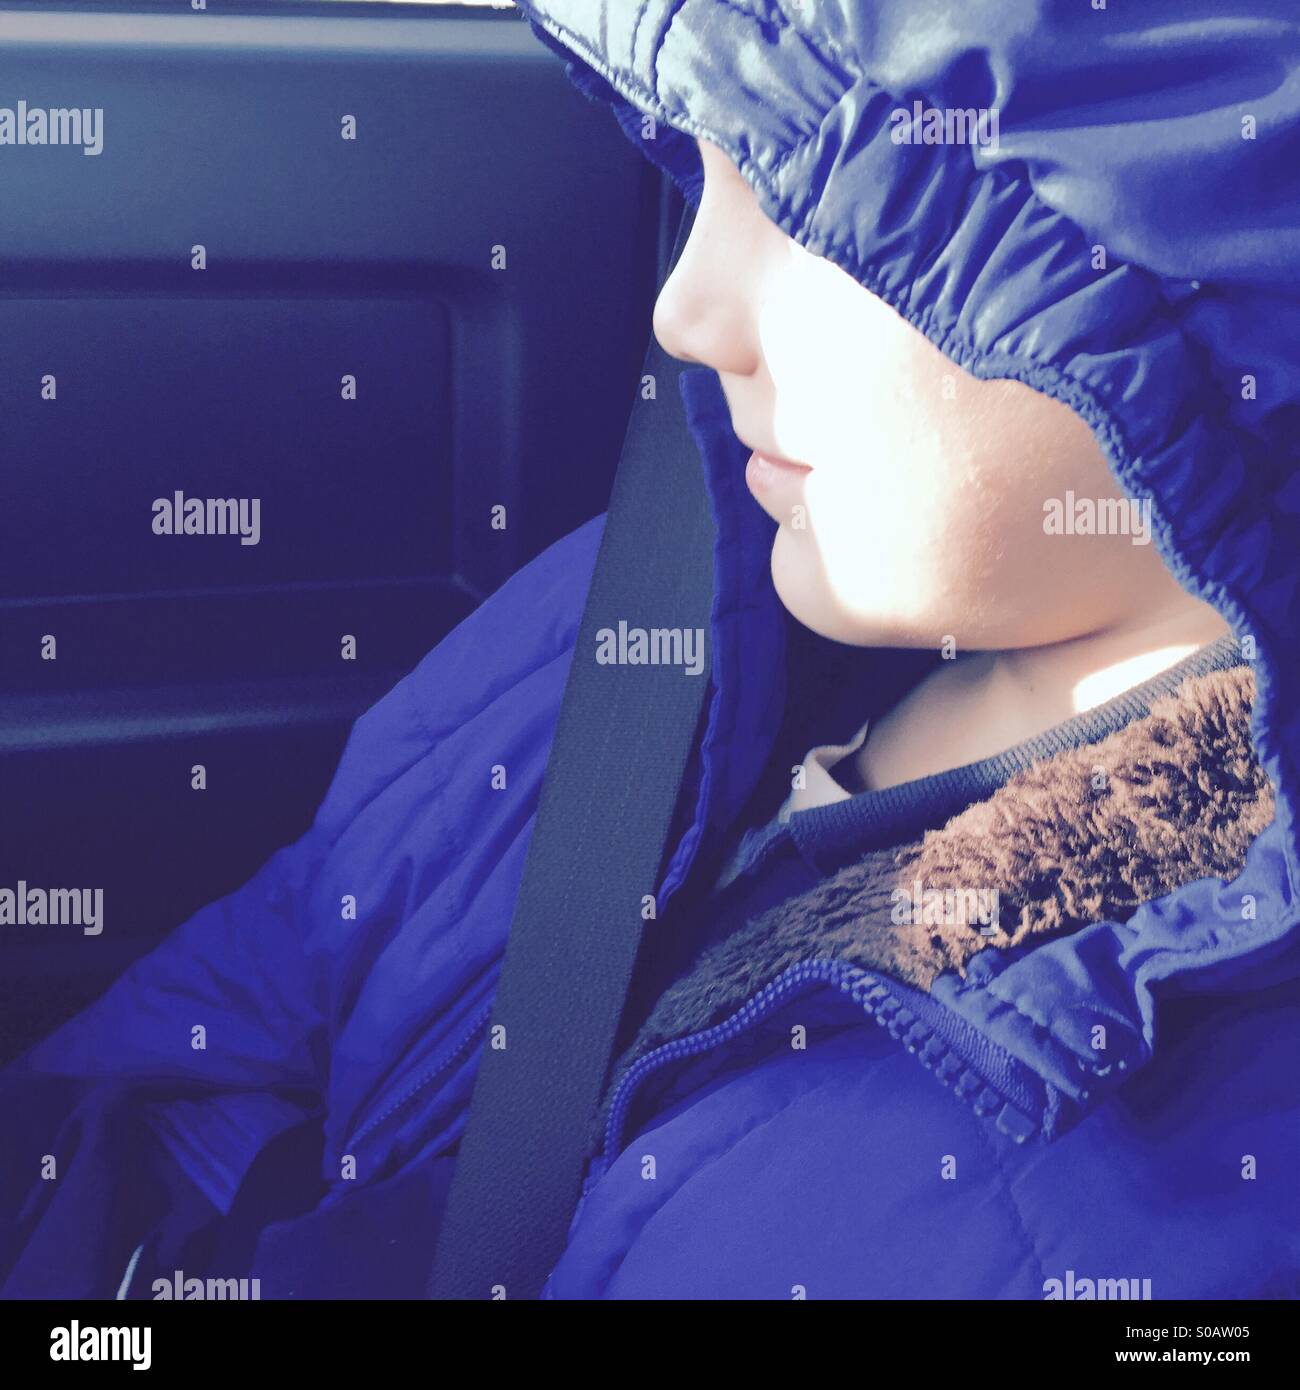 Profile of young boys face partially obscured by jacket hood Stock Photo